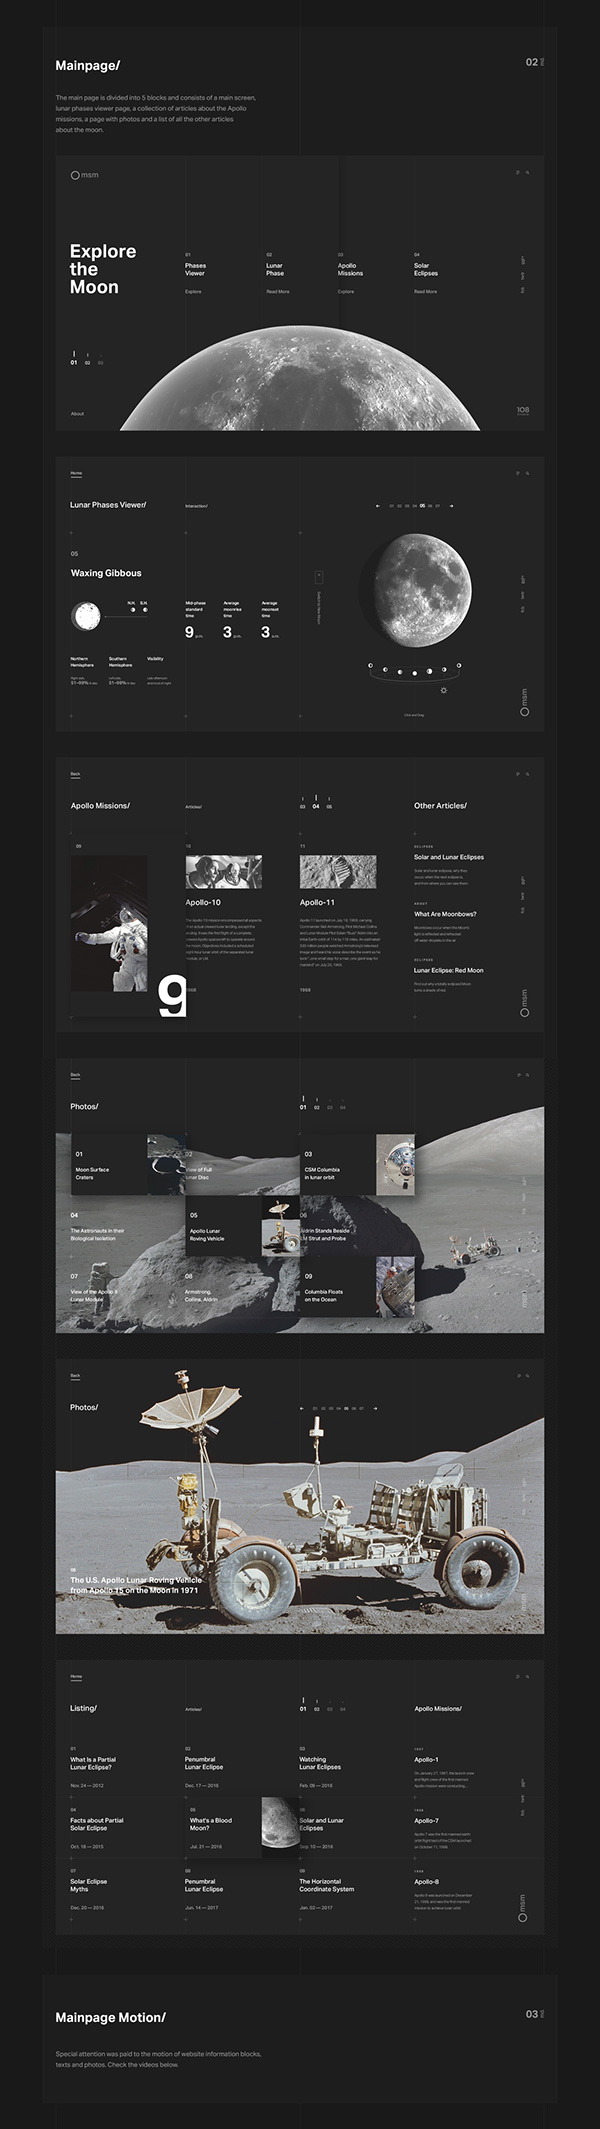 Explore the Moon Project